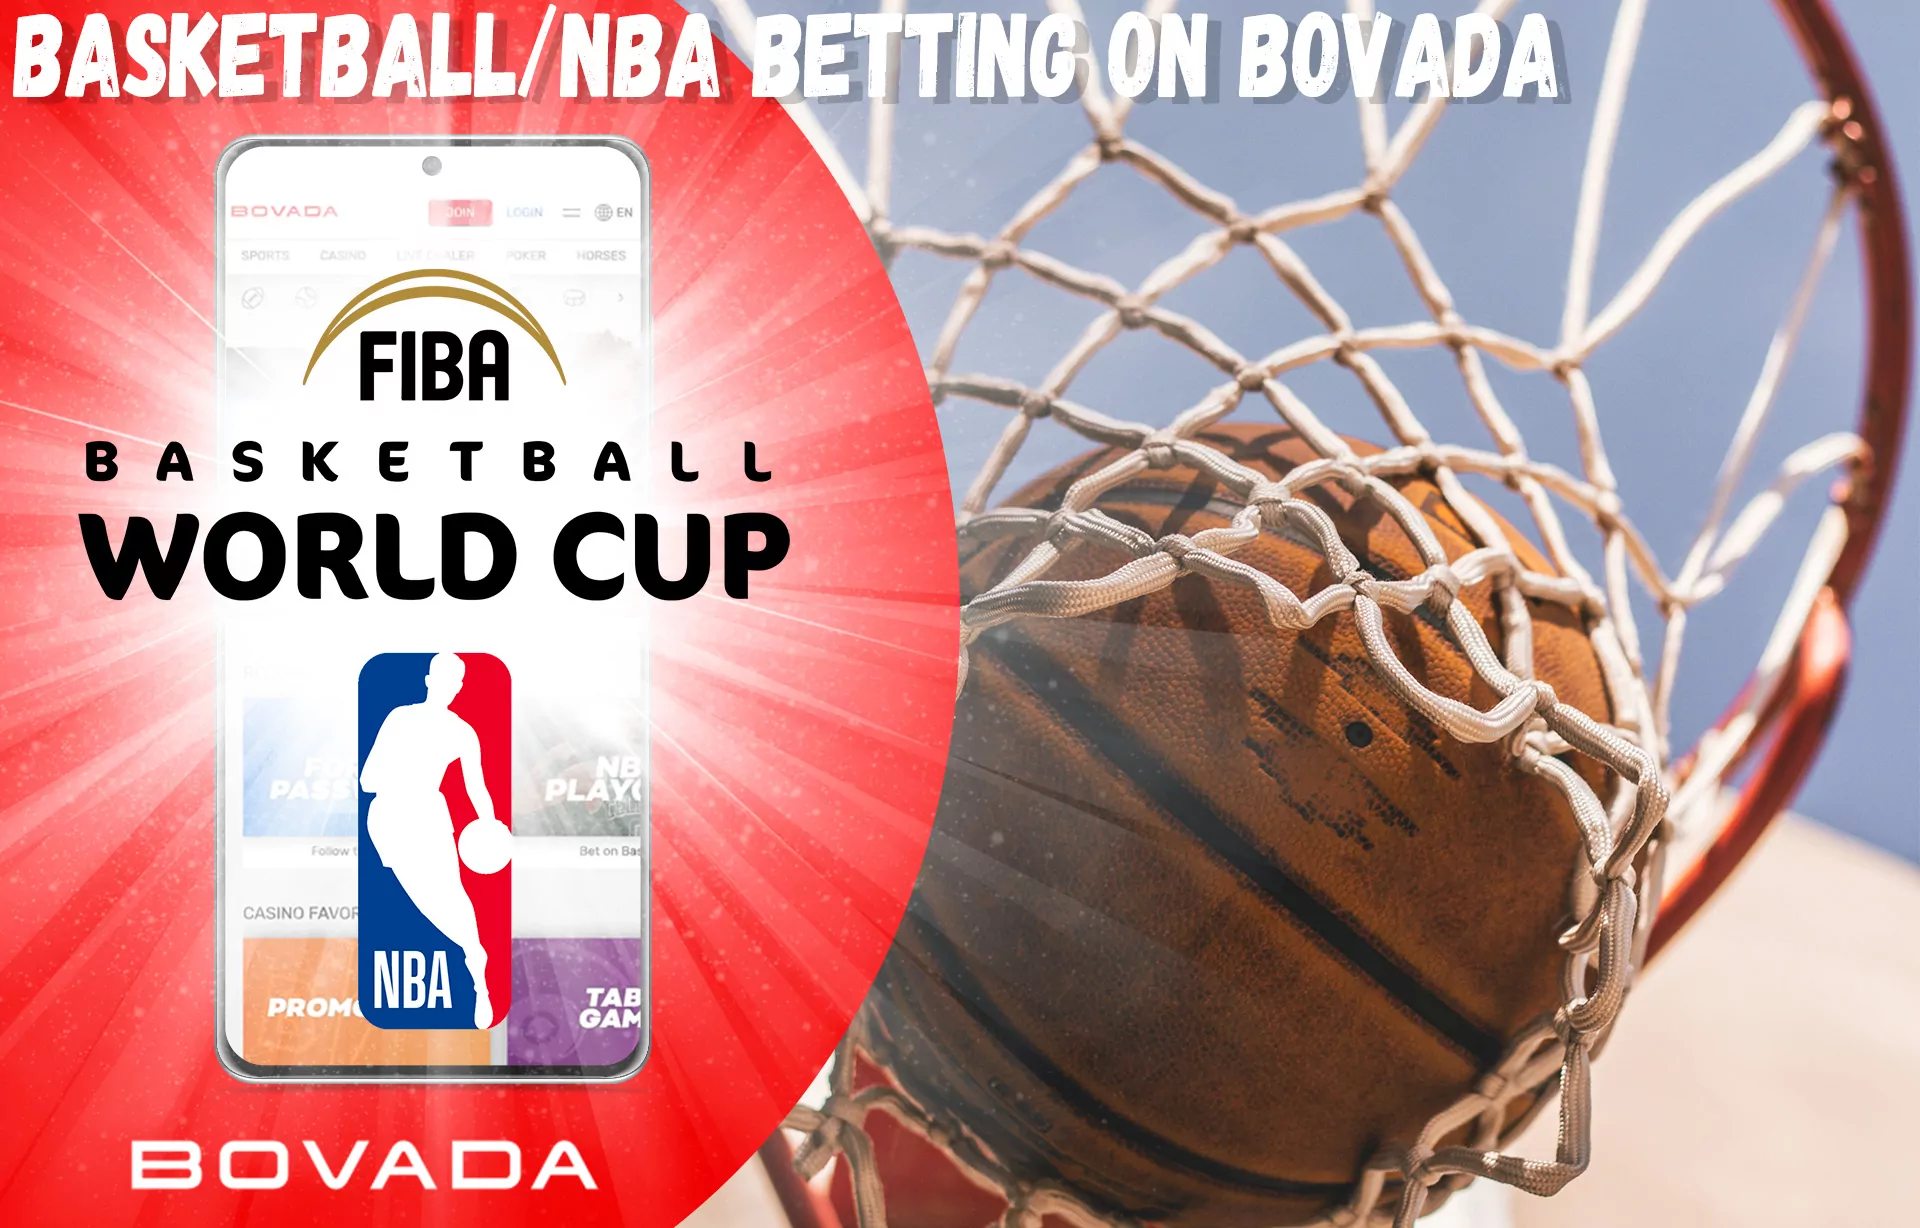 Bet on match winner, handicap, best player and exact score in Bovada.